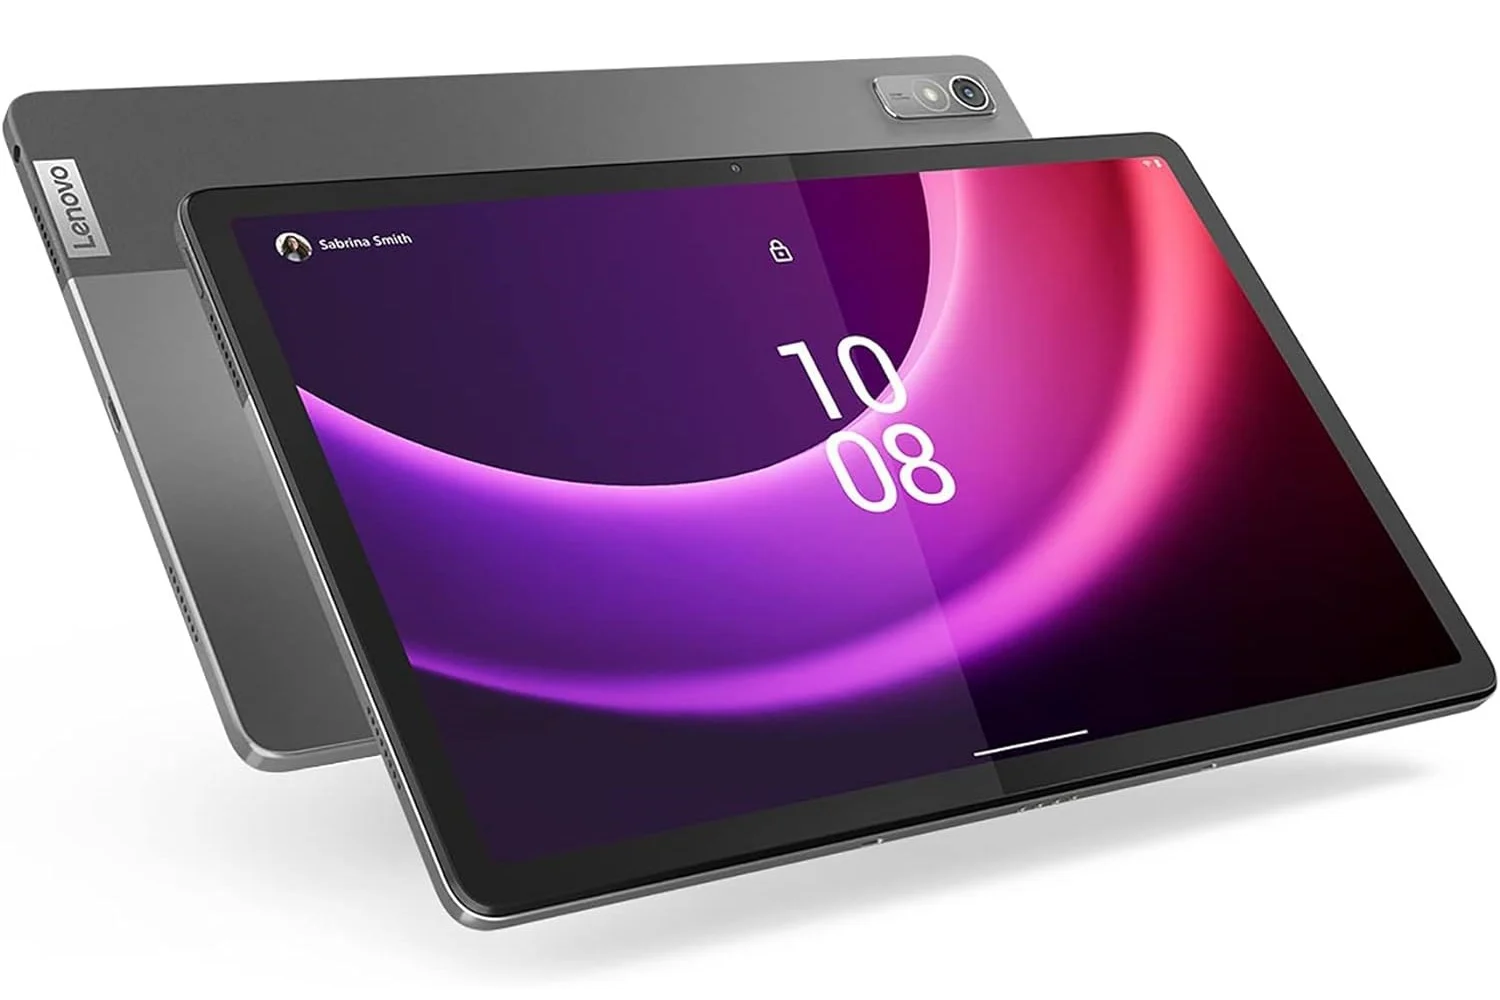 Dream promo on this Lenovo tablet available at a low price on Amazon